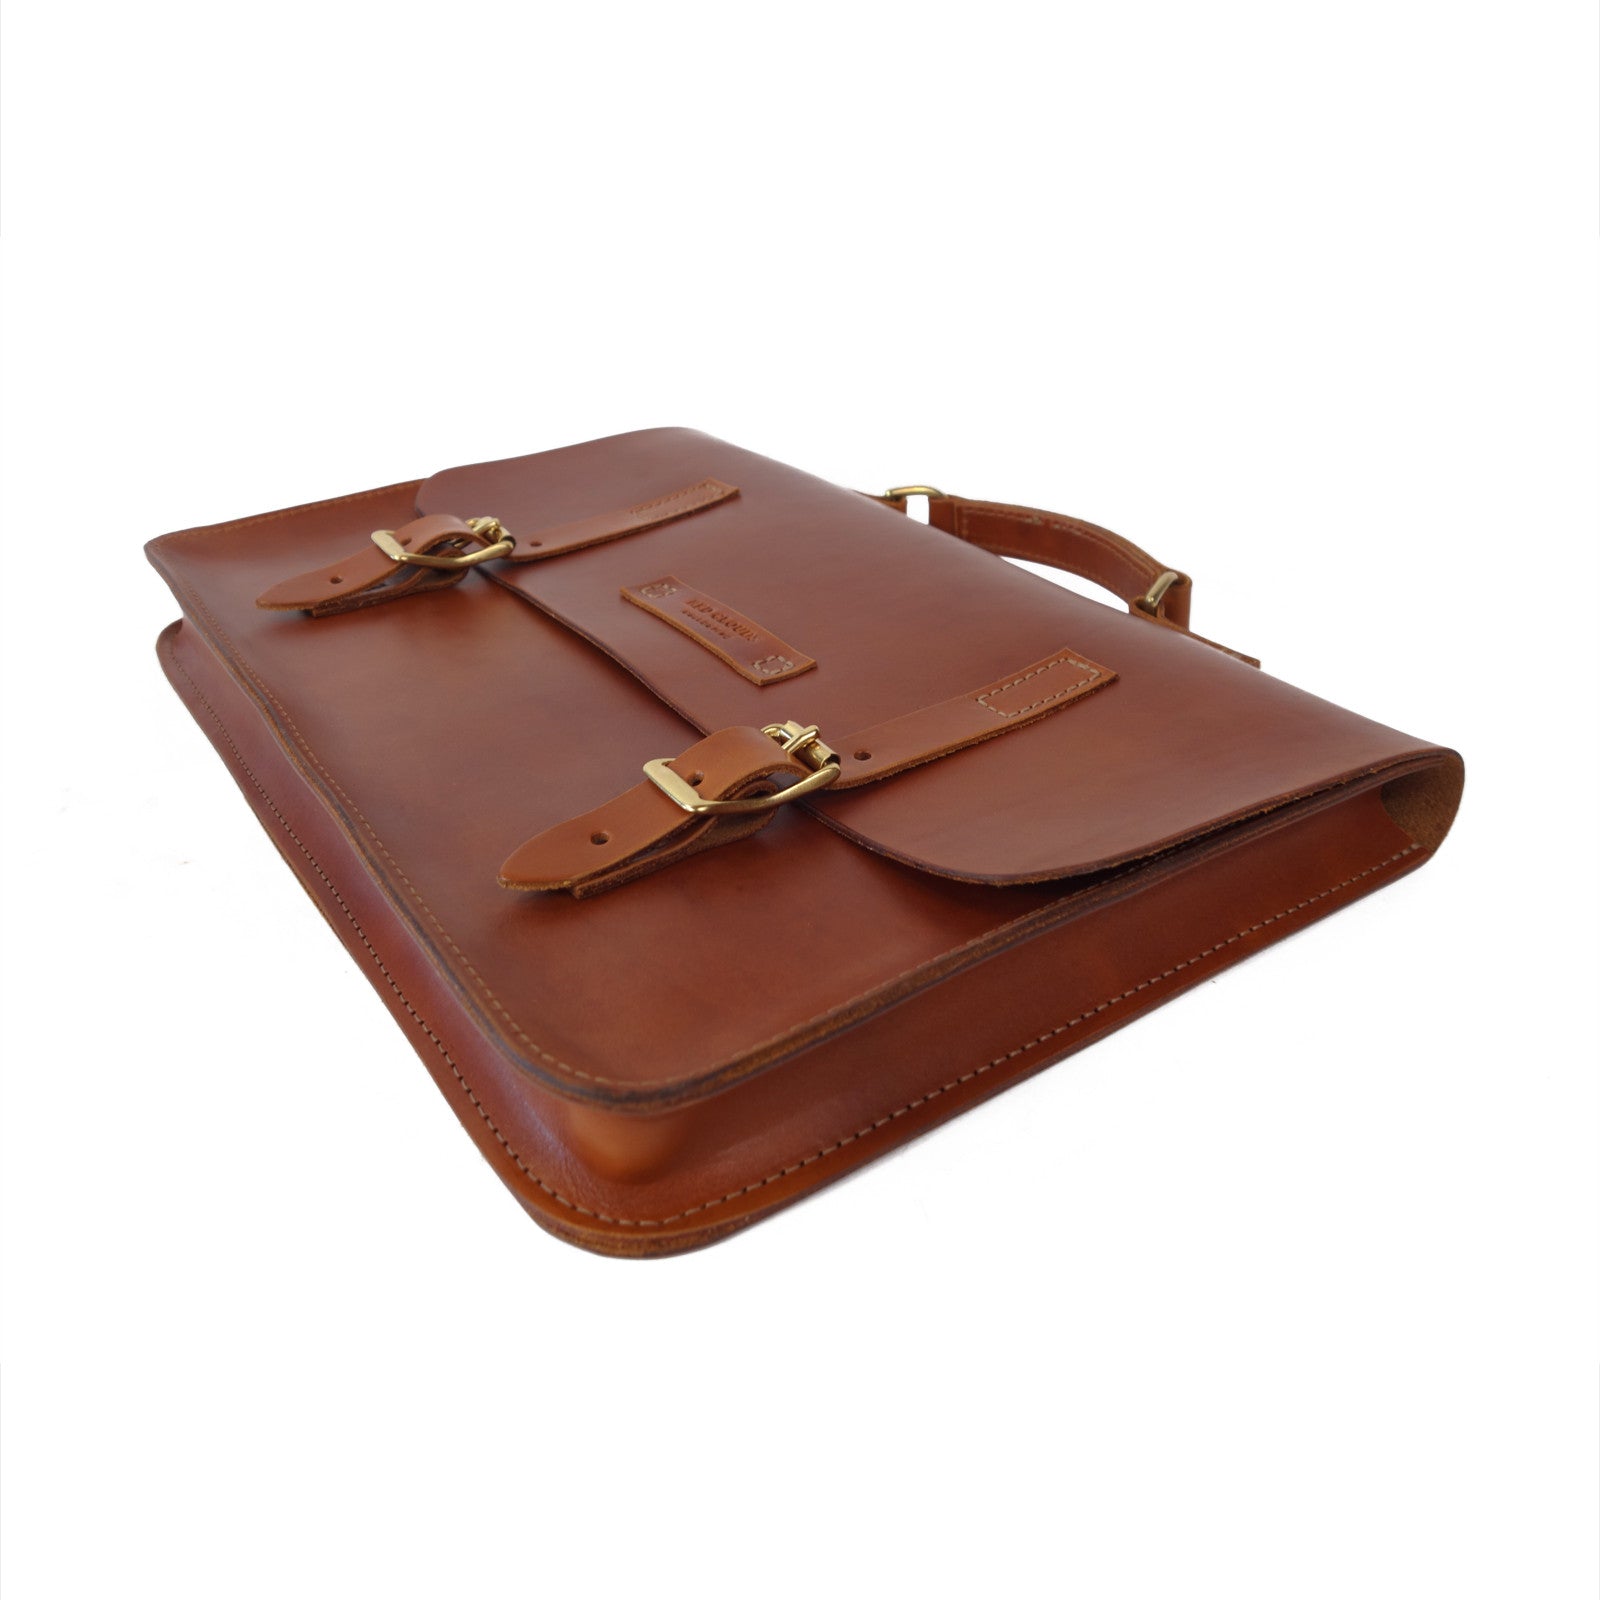 Briefcase, Leather computer bag, computer case, leather bag, laptop case, leather laptop bag, leather carrying case for your laptop and documents, leather briefcase, made in usa, vegetable tanned leather, laptop bag